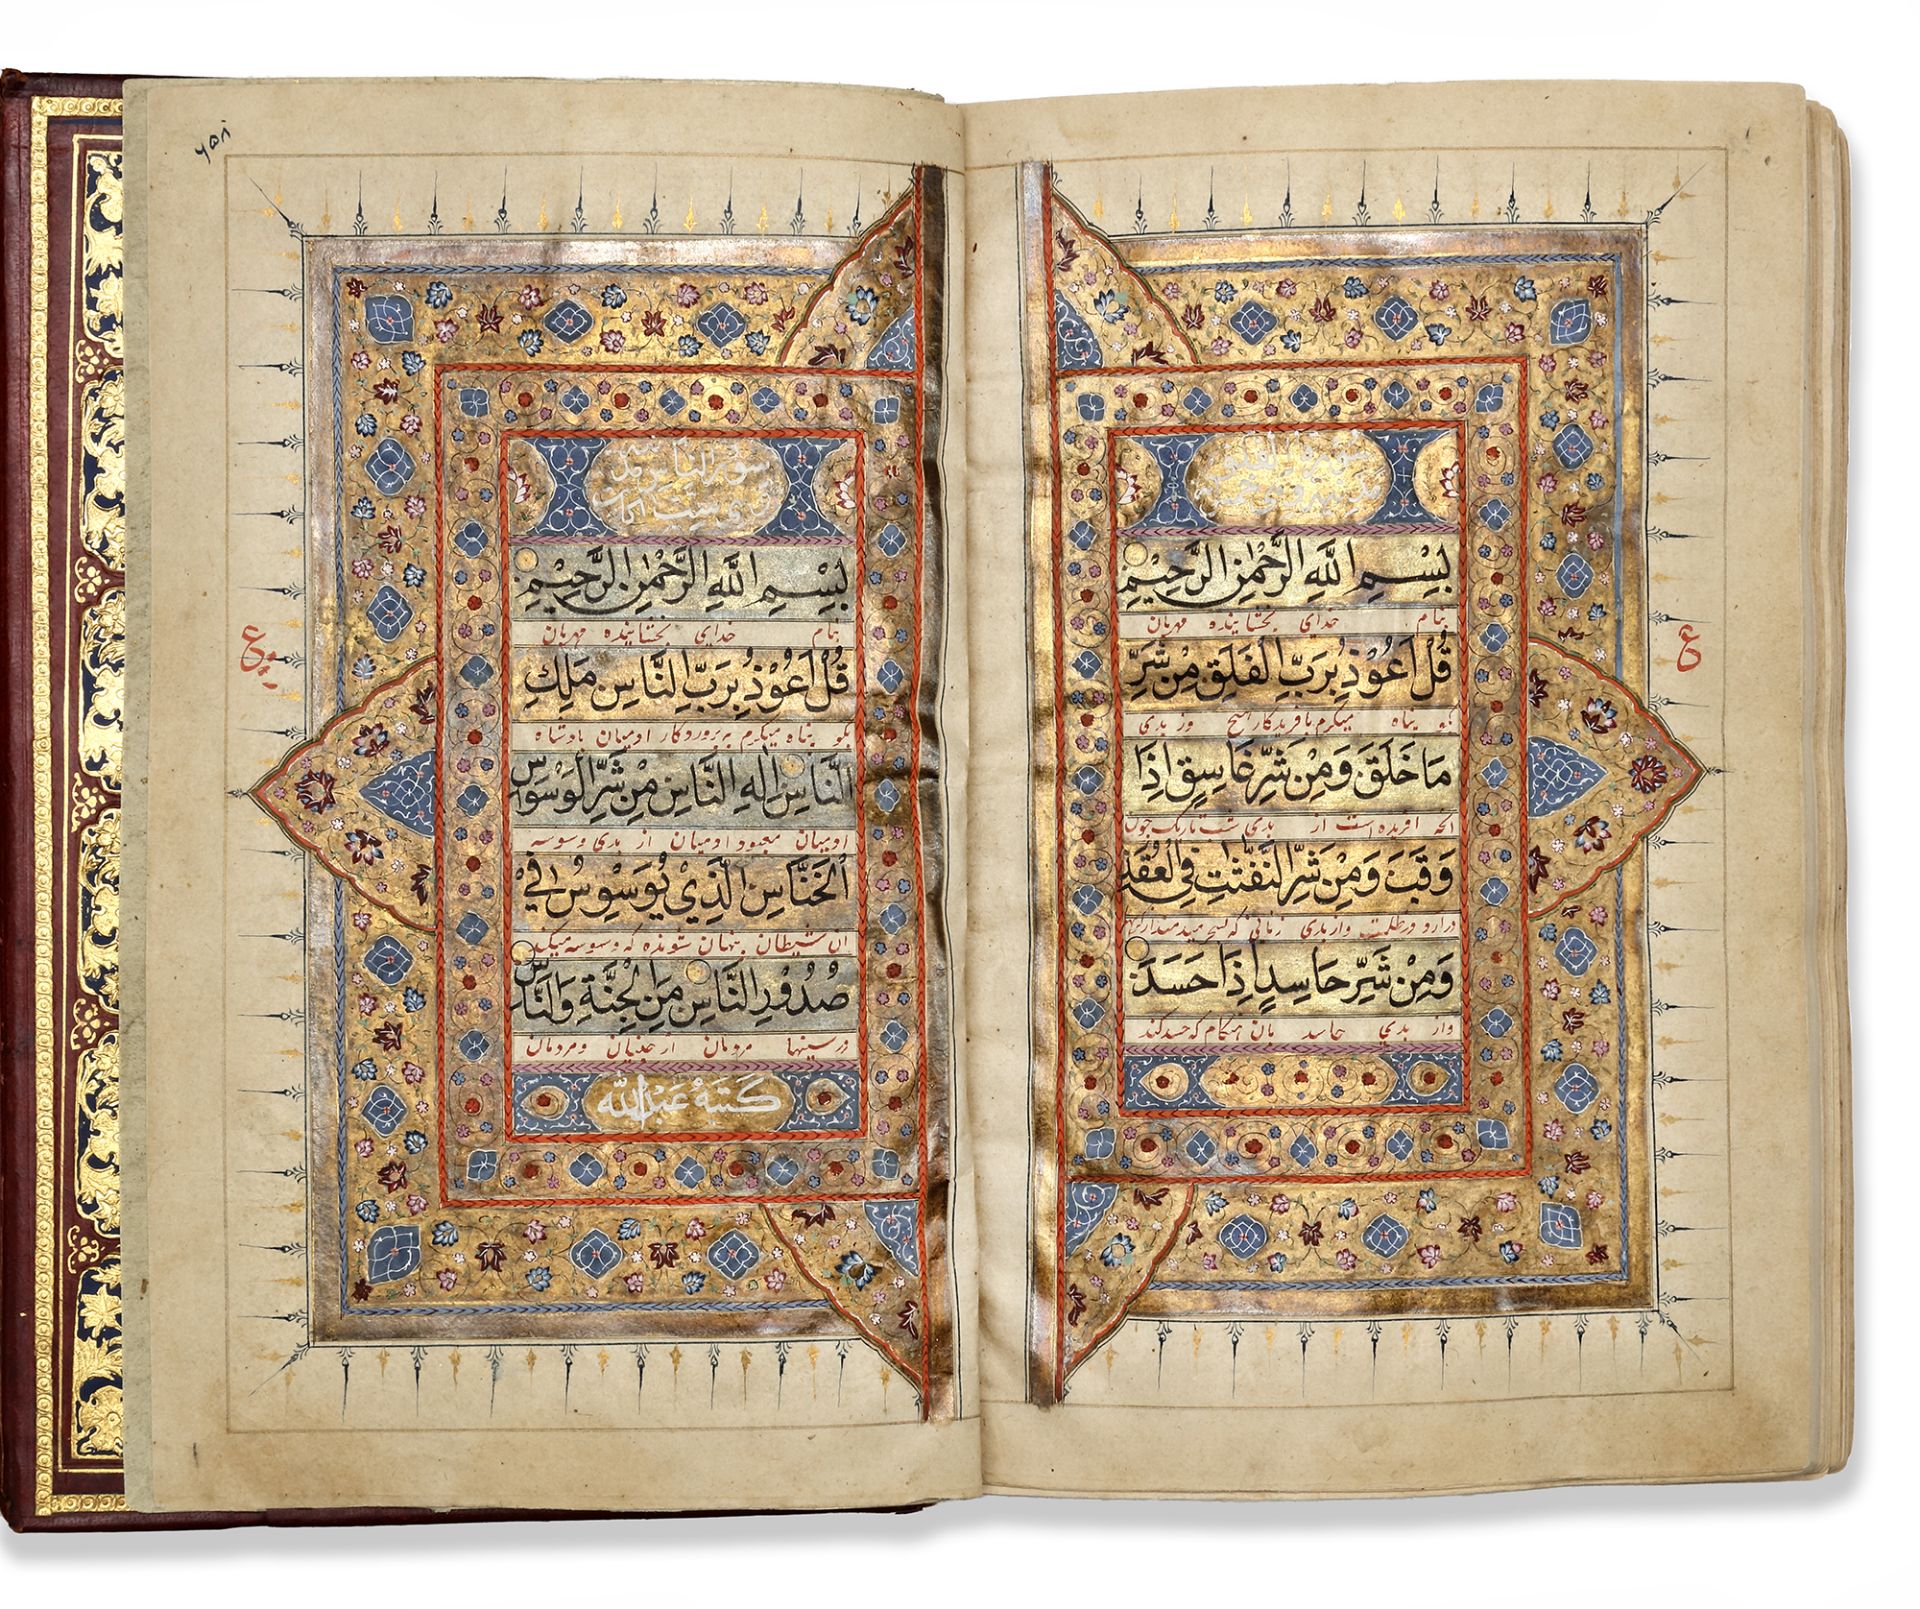 A FINELY ILLUMINATED QURAN, CENTRAL ASIA, 18TH CENTURY - Image 4 of 8